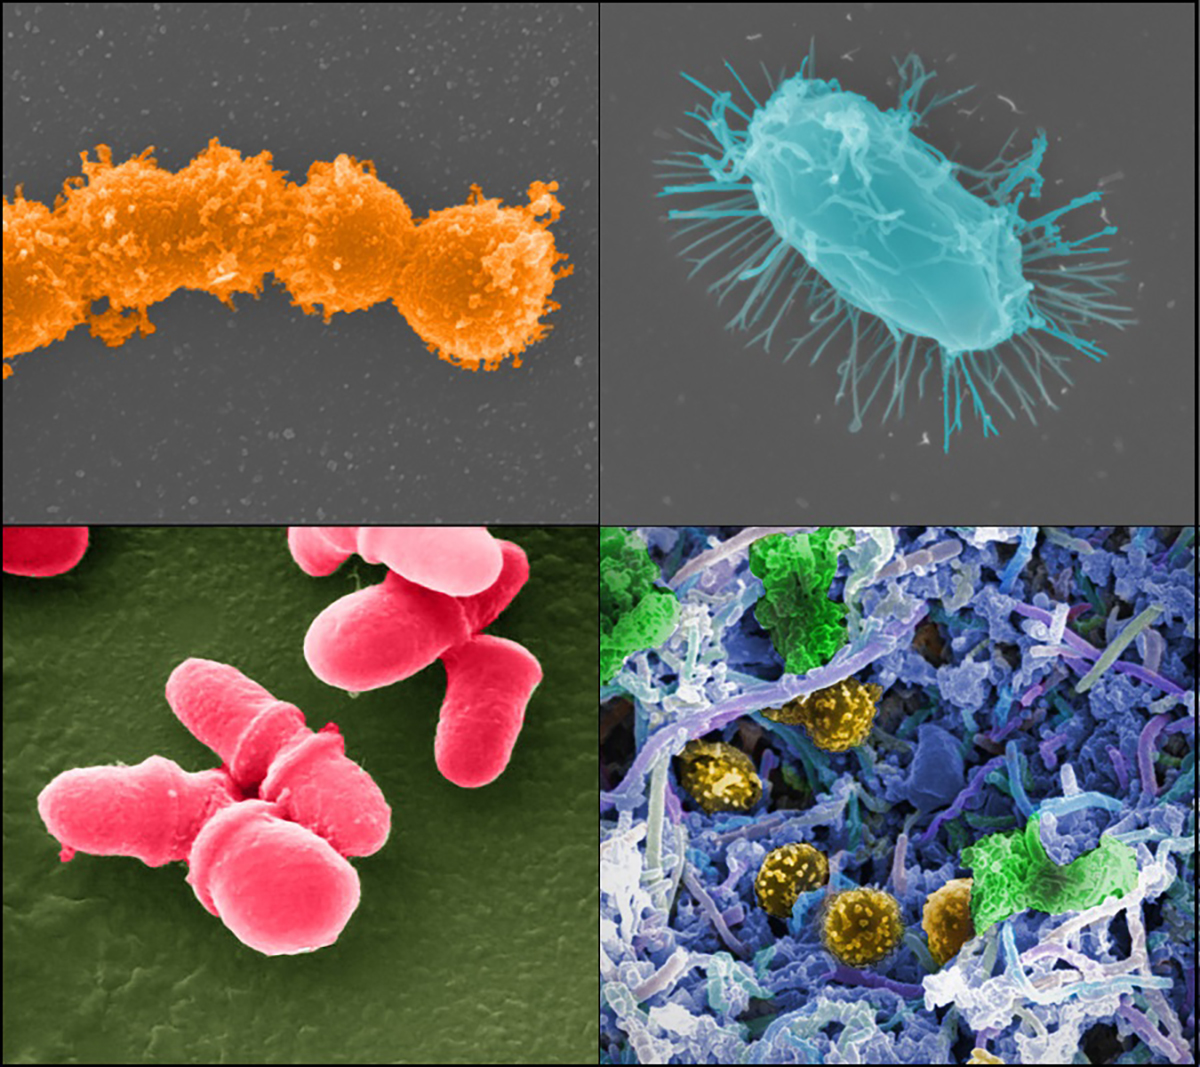 : Microscopic images of bacteri